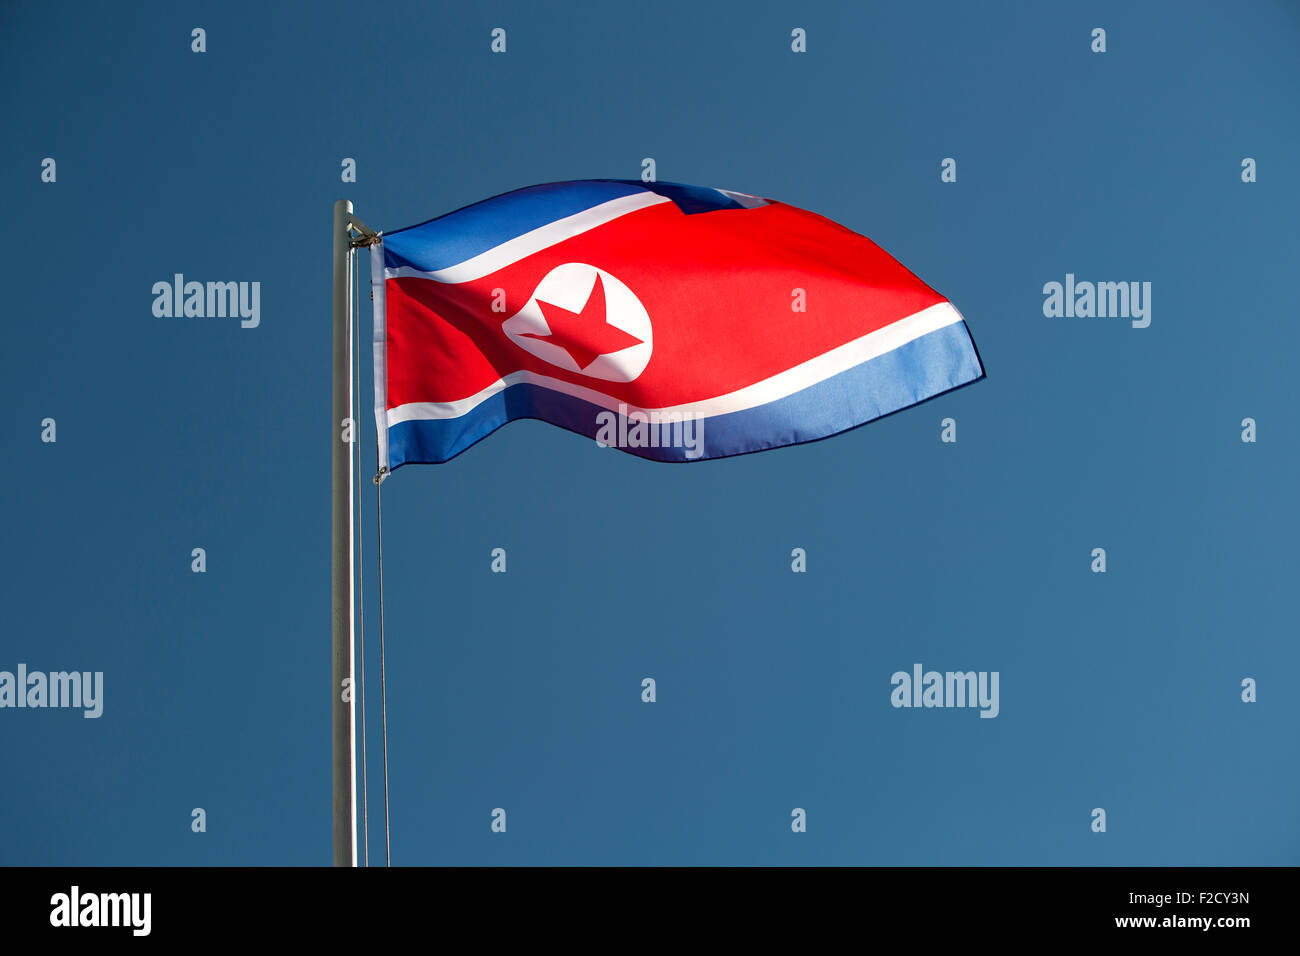 North Korea flag in front of a blue sky Stock Photo